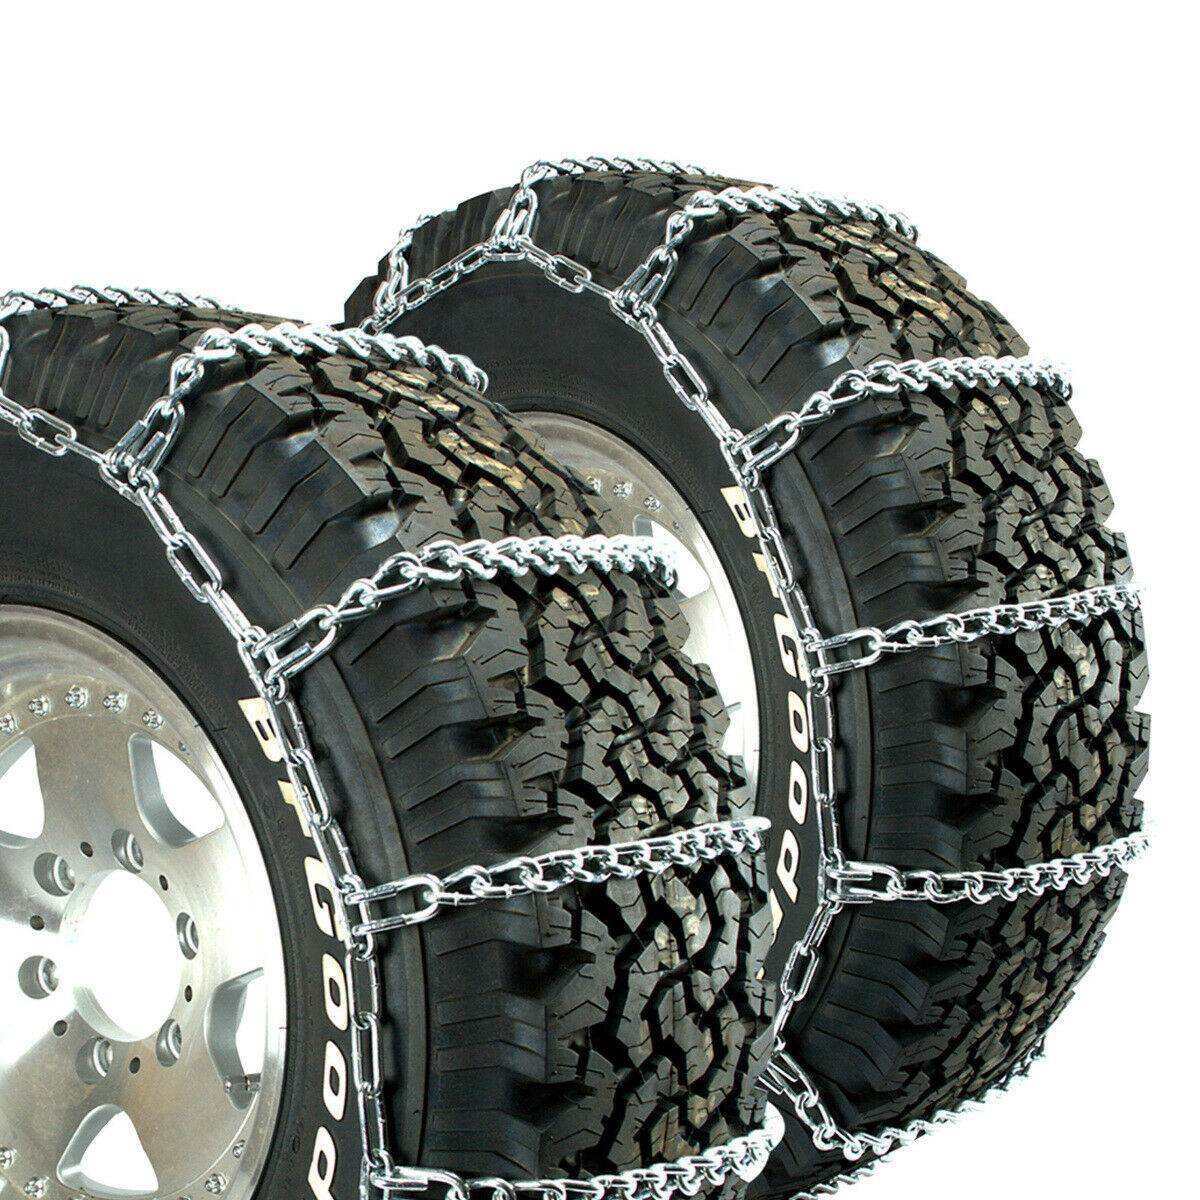 Titan Truck Link Tire Chains On Road Snow/ice 7mm 245/75-22.5